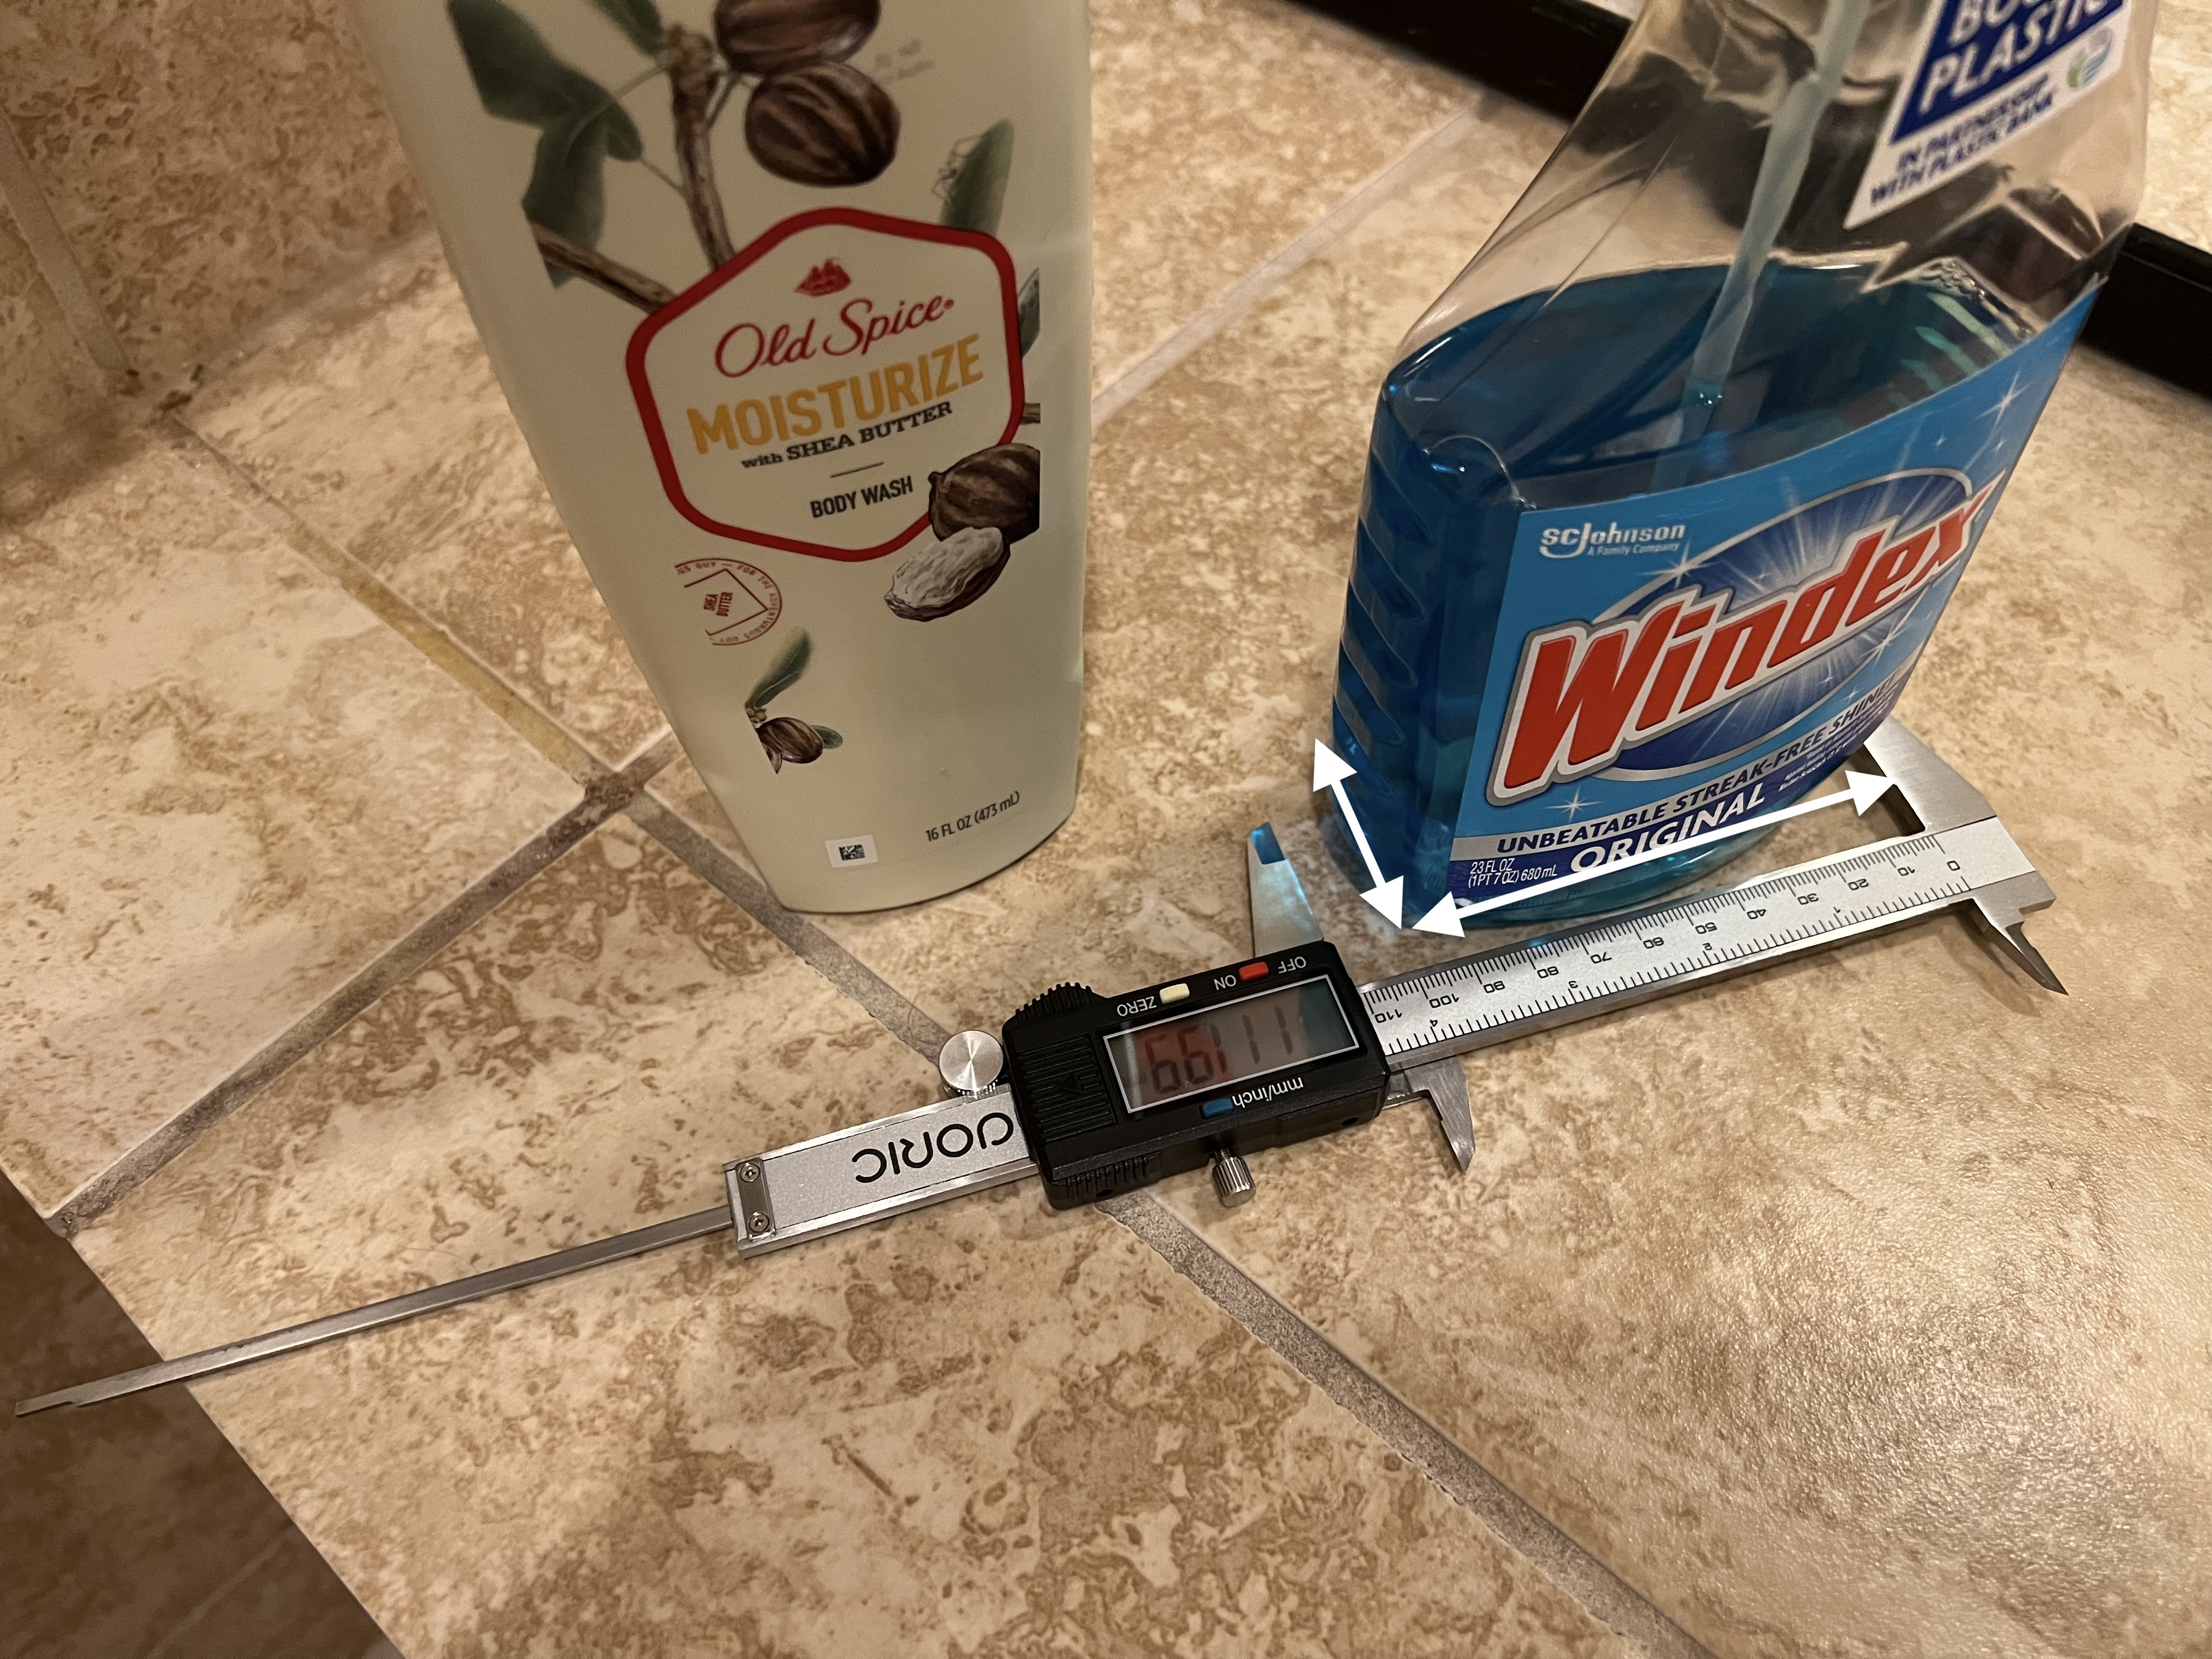 Photograph of measurements of shower accessories with rectangular bases including Windex bottle and body wash